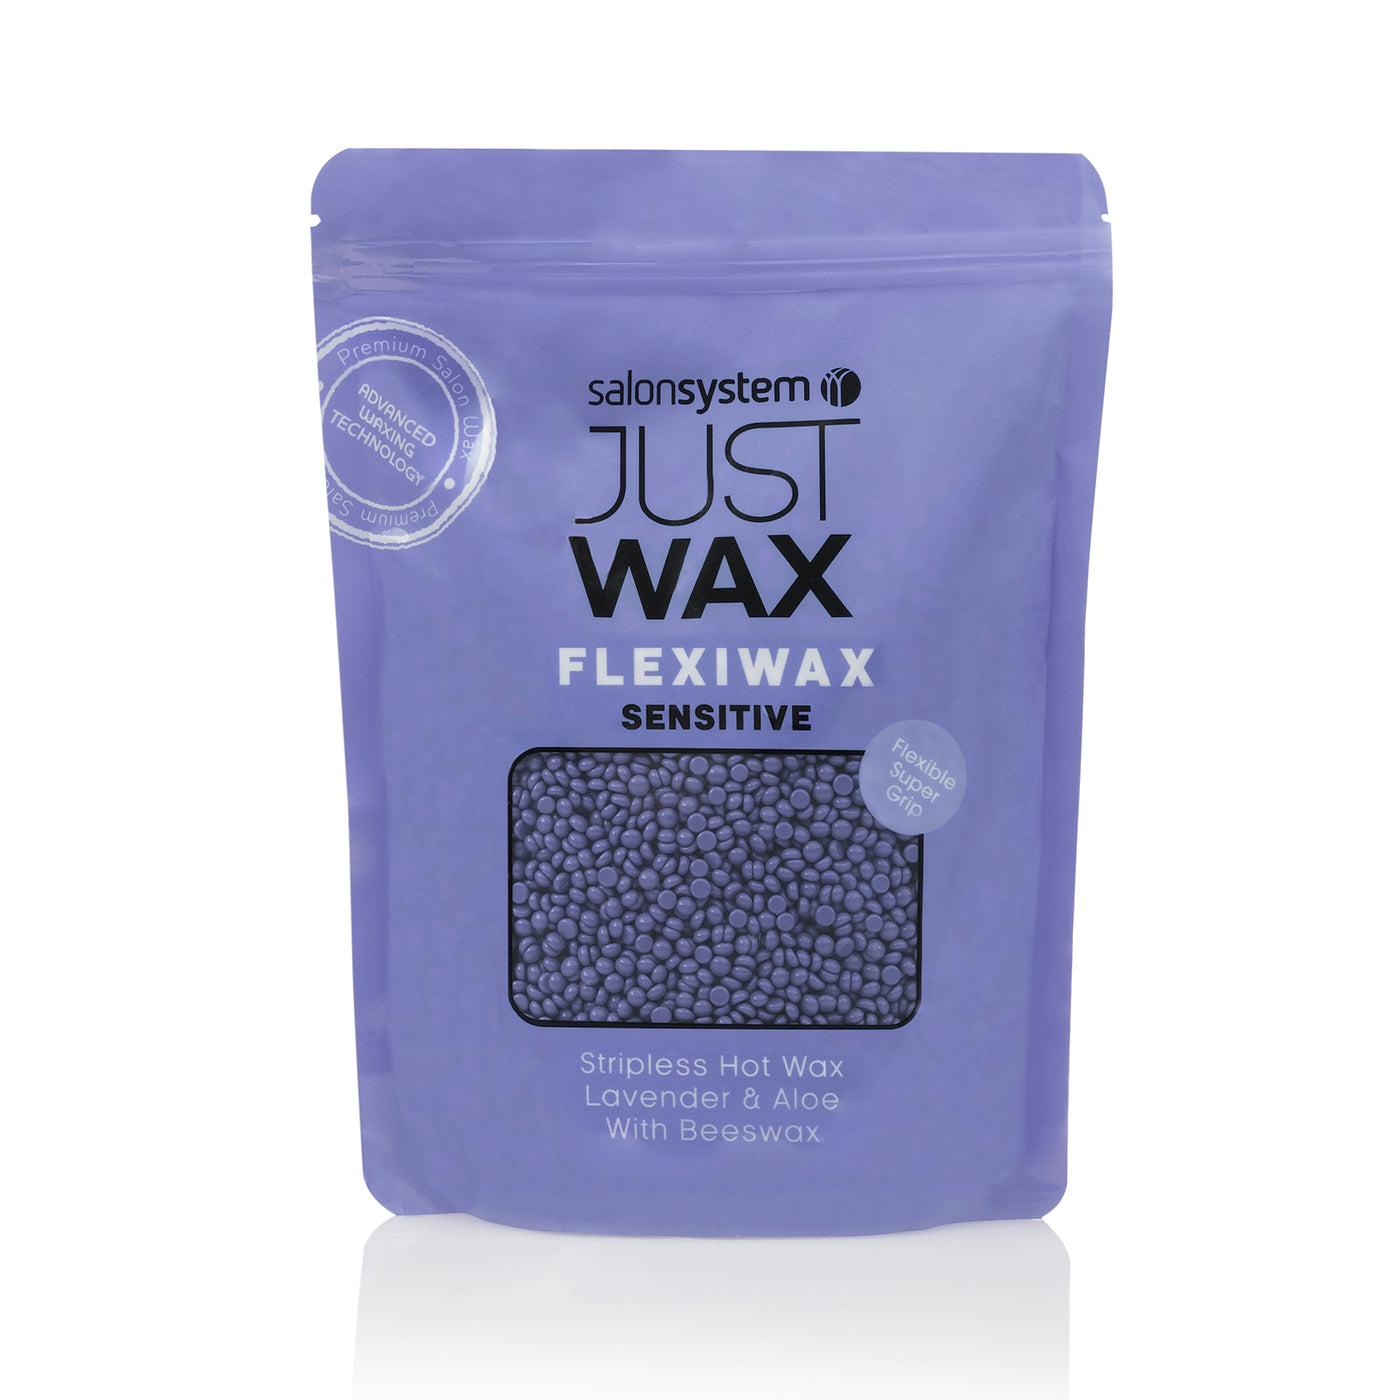 Just Wax Flexiwax Sensitive Beads (700g) - Ultimate Hair and Beauty